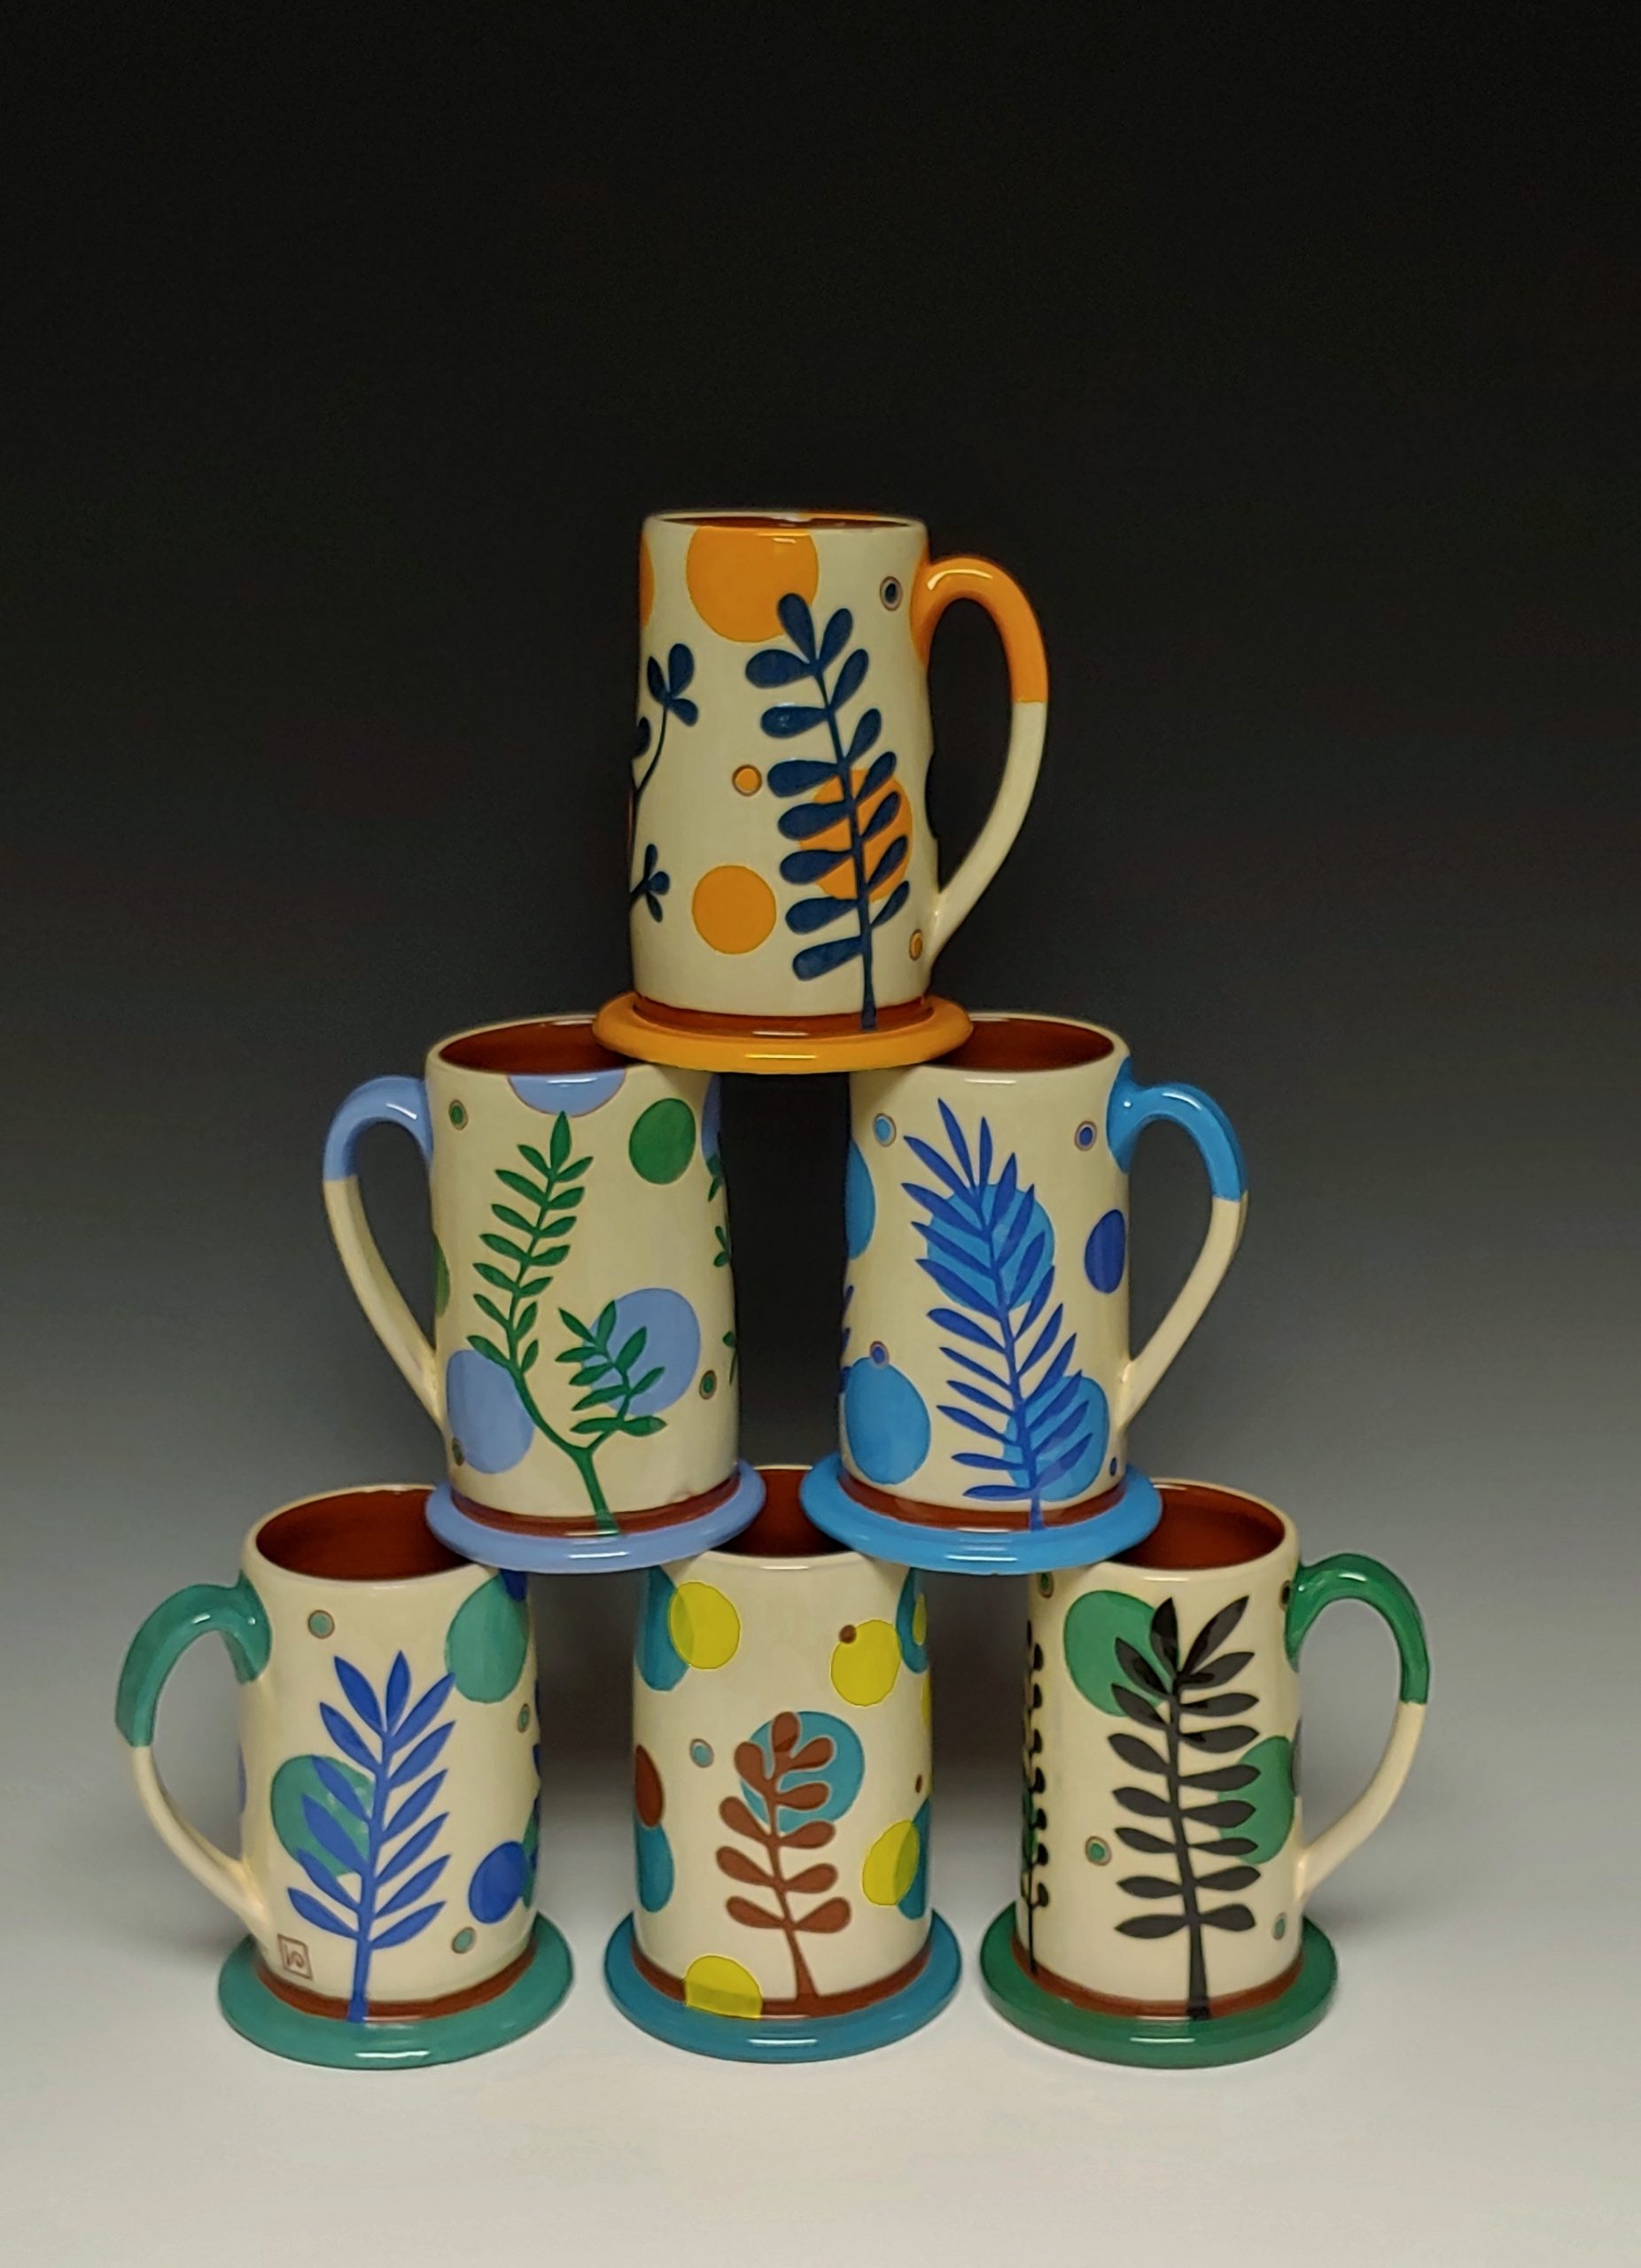 Six Stacked Colorful mugs